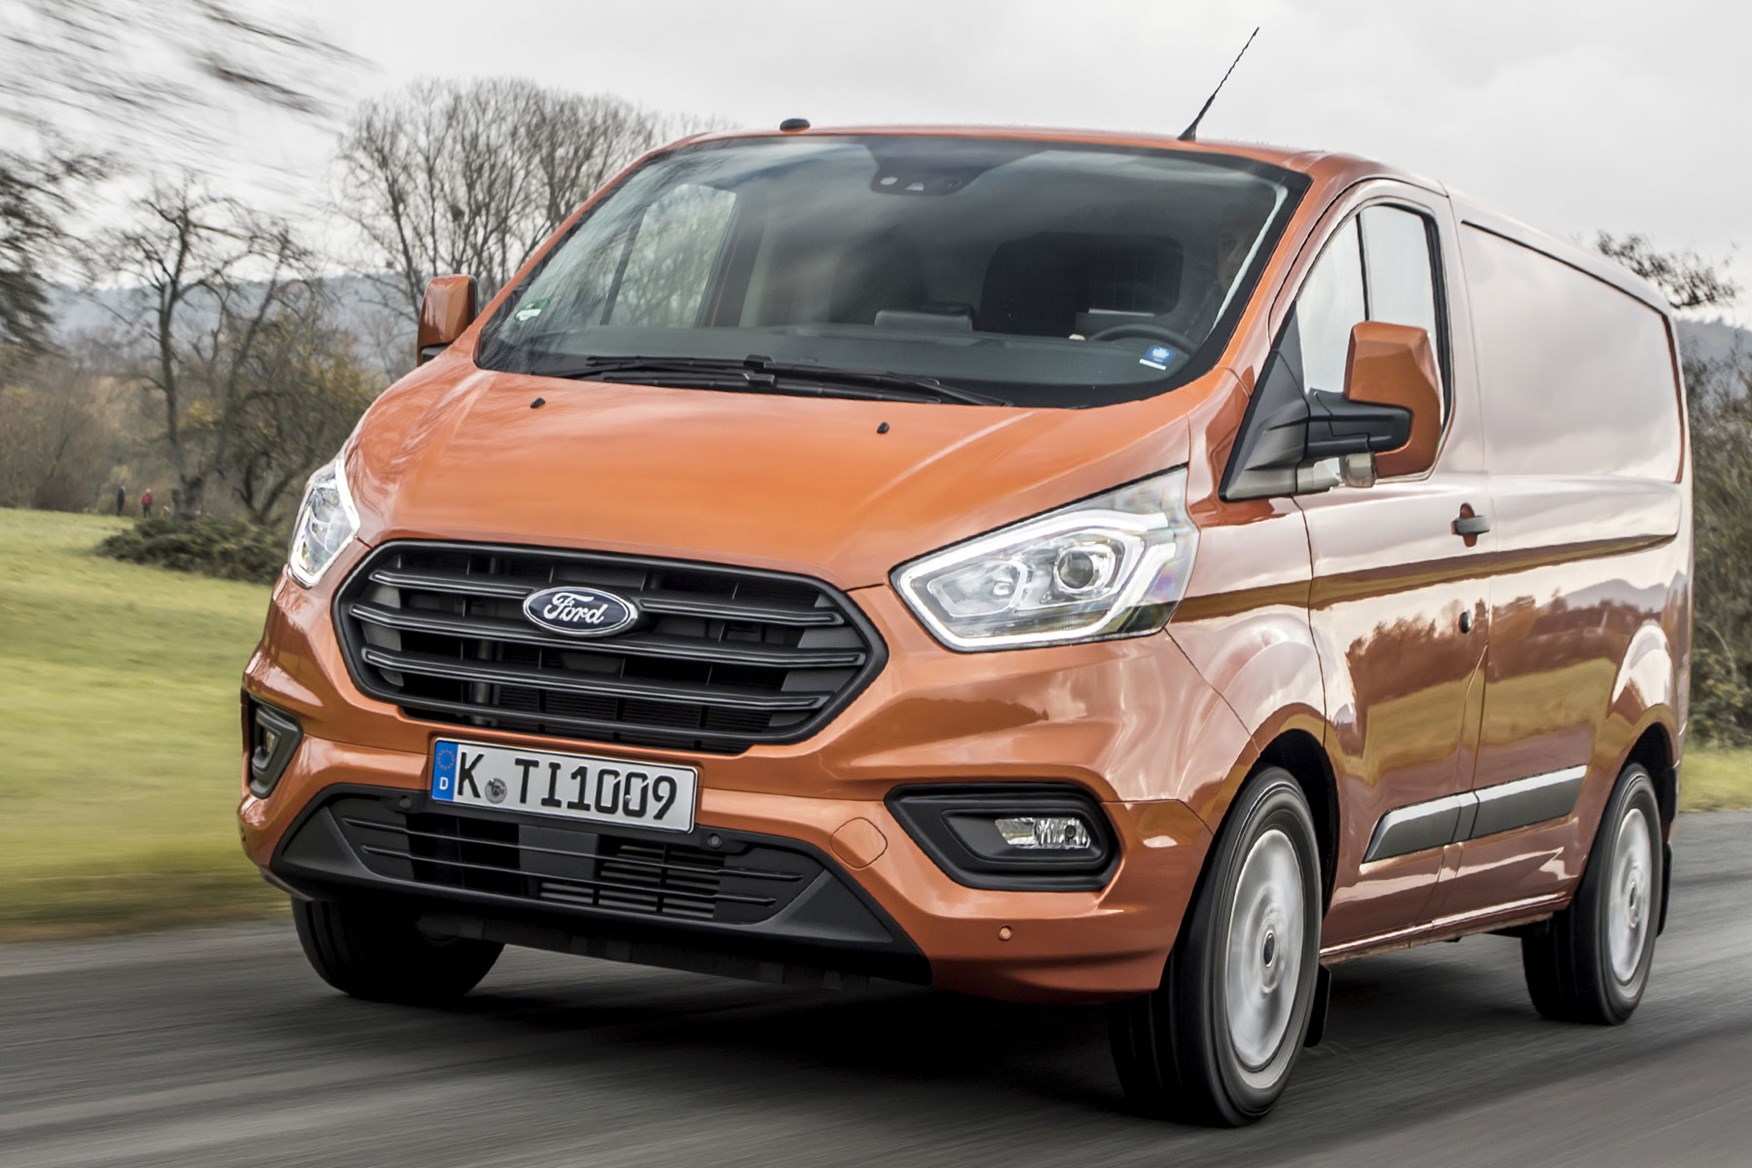 Instrukcja Obslugi Ford Transit Custom 2018 New Ford Transit Custom for 2018 – info and pictures of facelift for UK’s bestselling van | Parkers